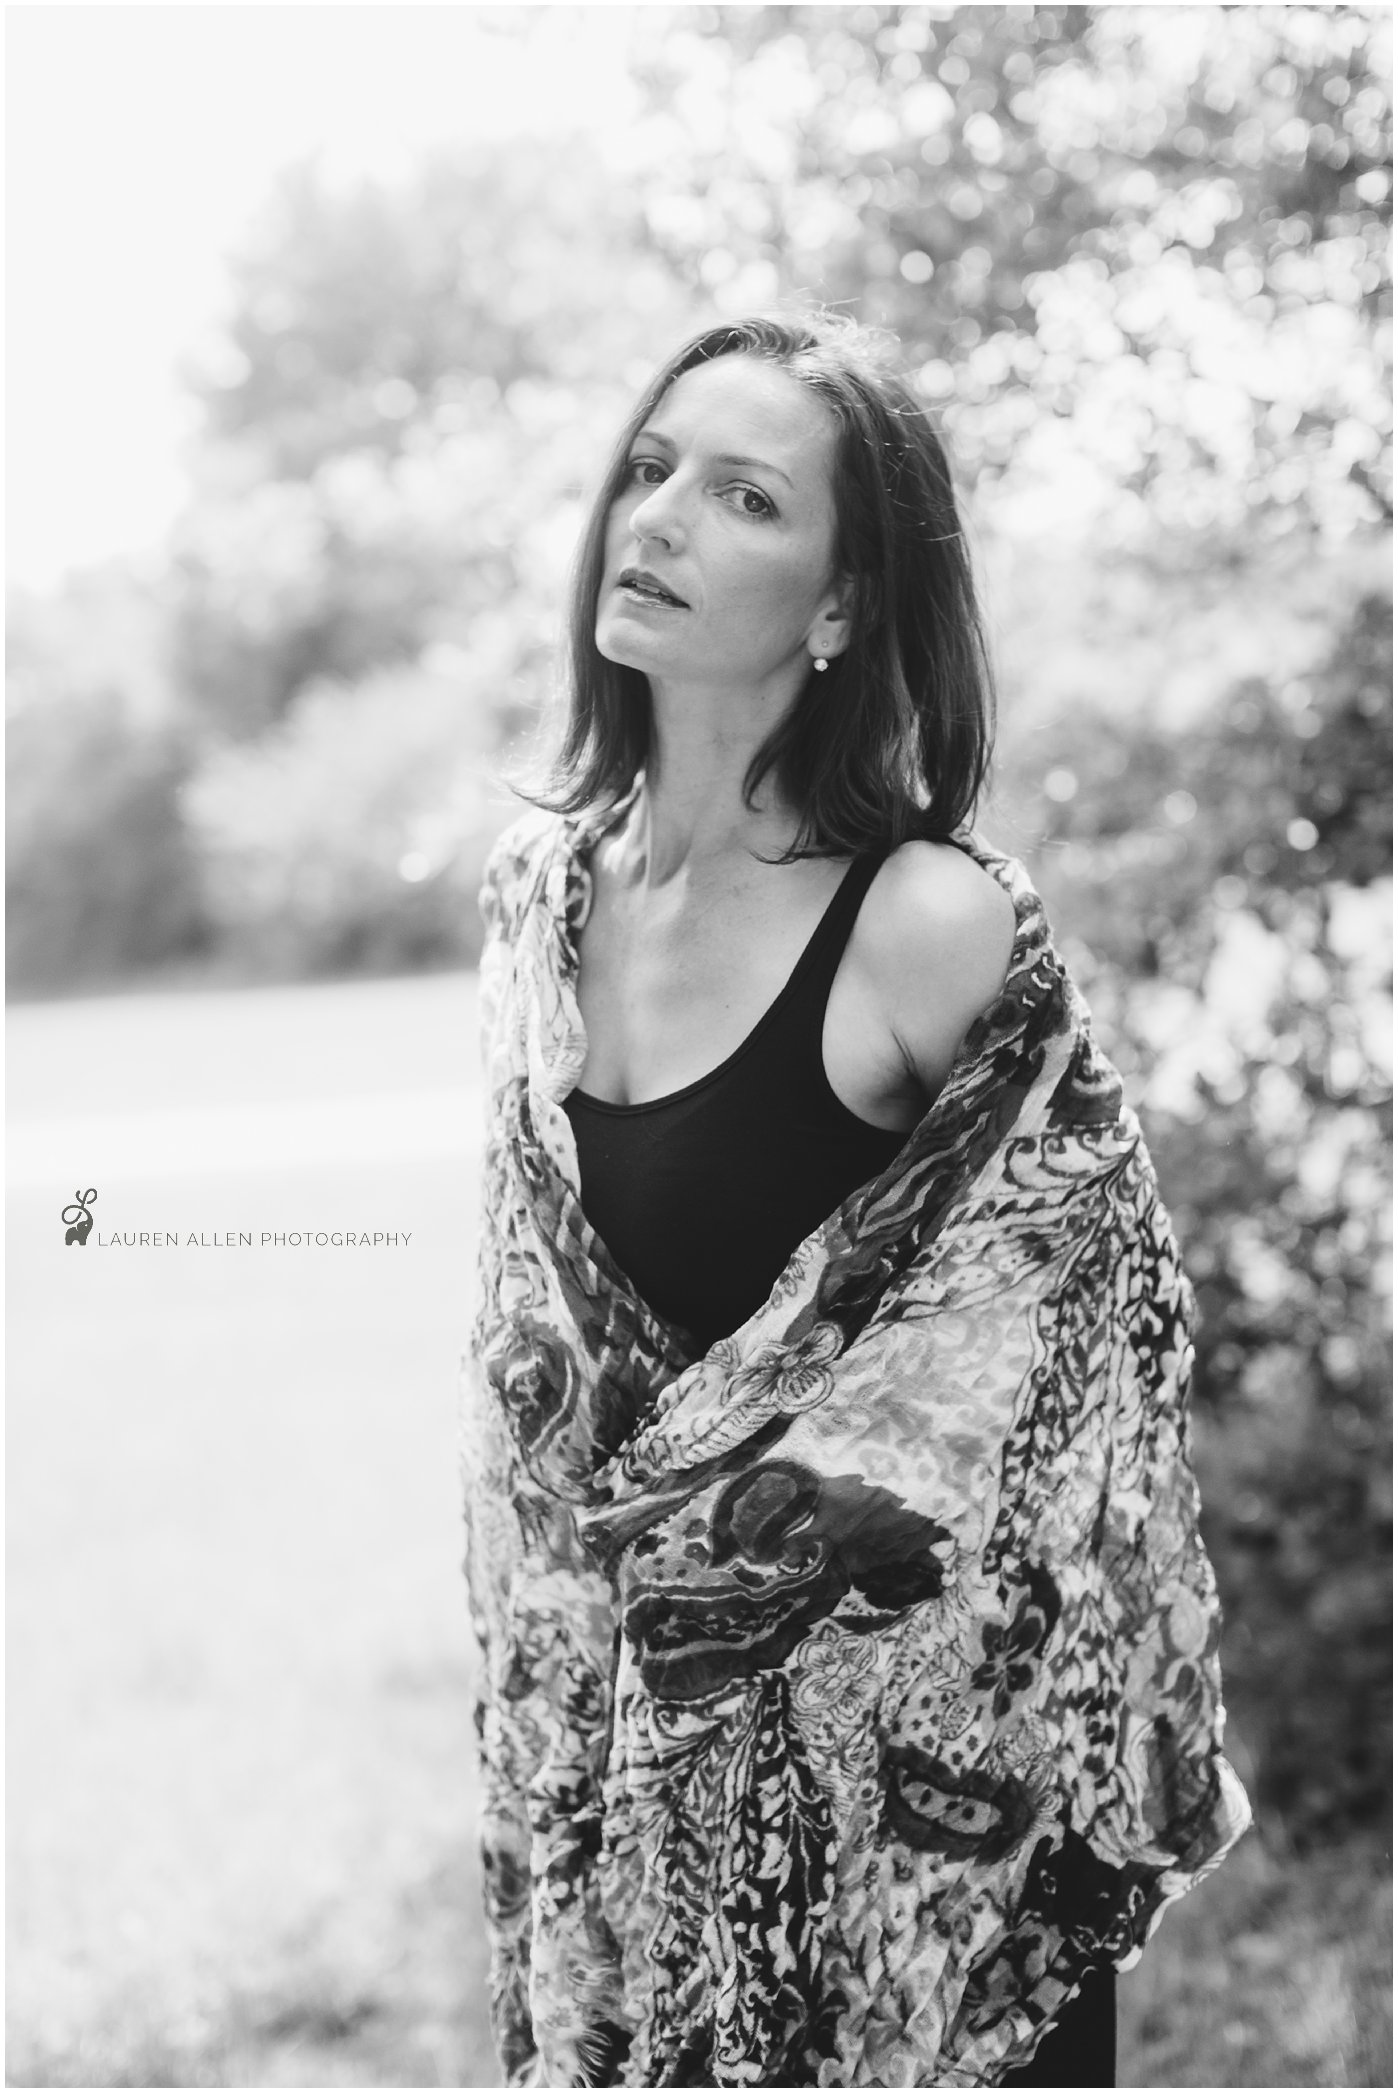 Daria,Head shot,Katy,Ratliff,Texas,afternoon,beauty,dress,lady,lauren allen photography,natural night,outdoors,outside,portrait,scarf,shade,skirt,travel,woman,